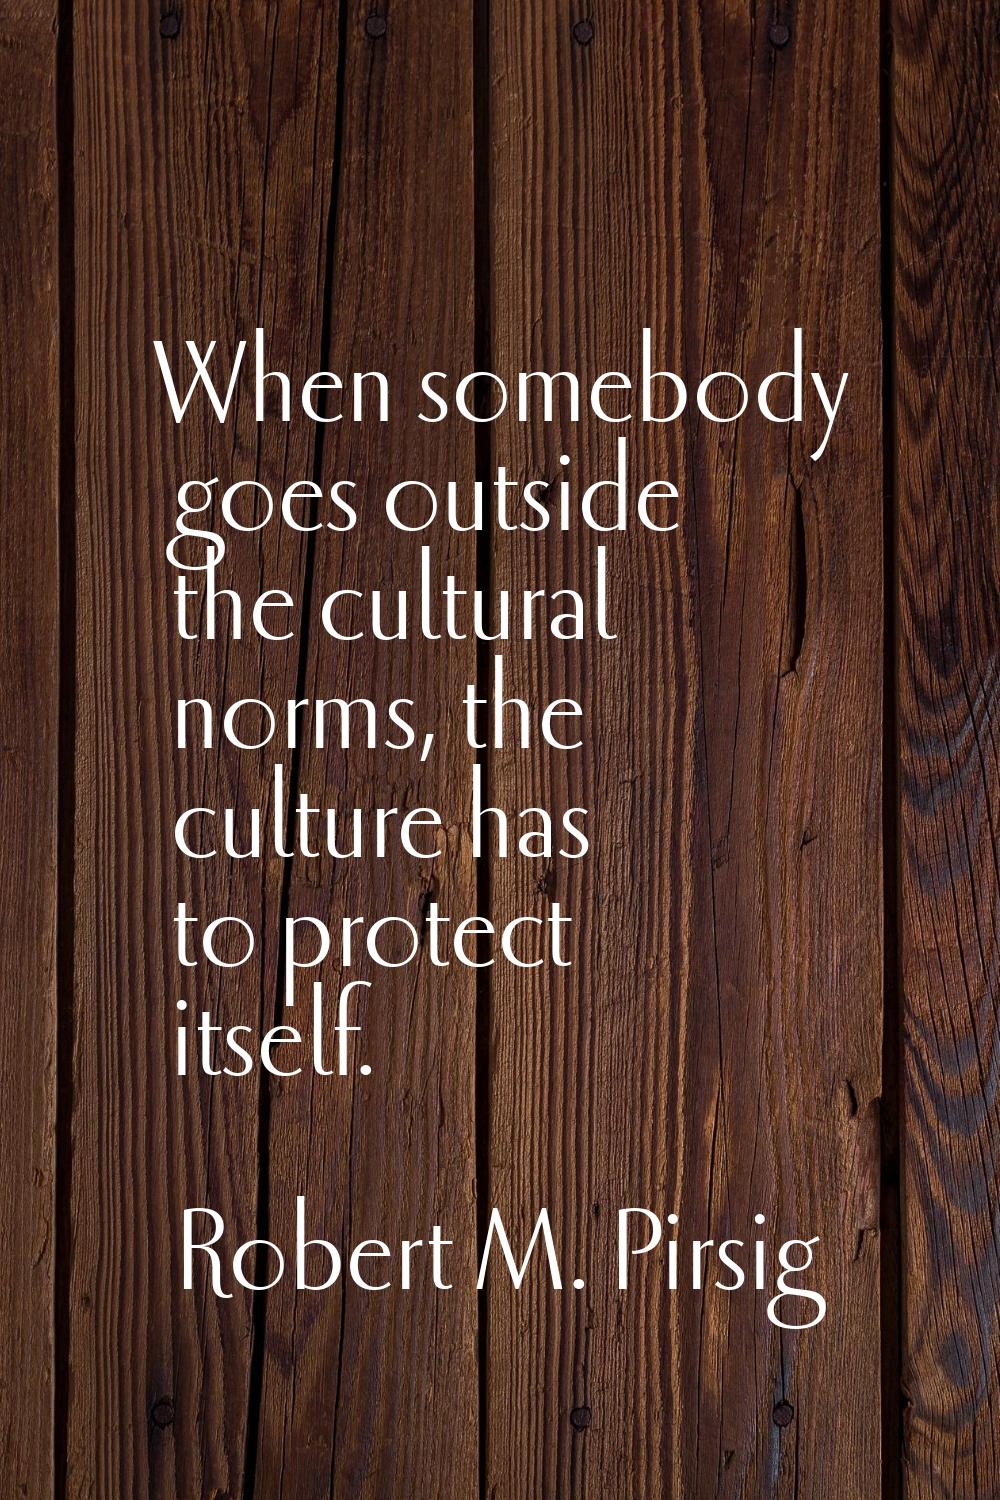 When somebody goes outside the cultural norms, the culture has to protect itself.